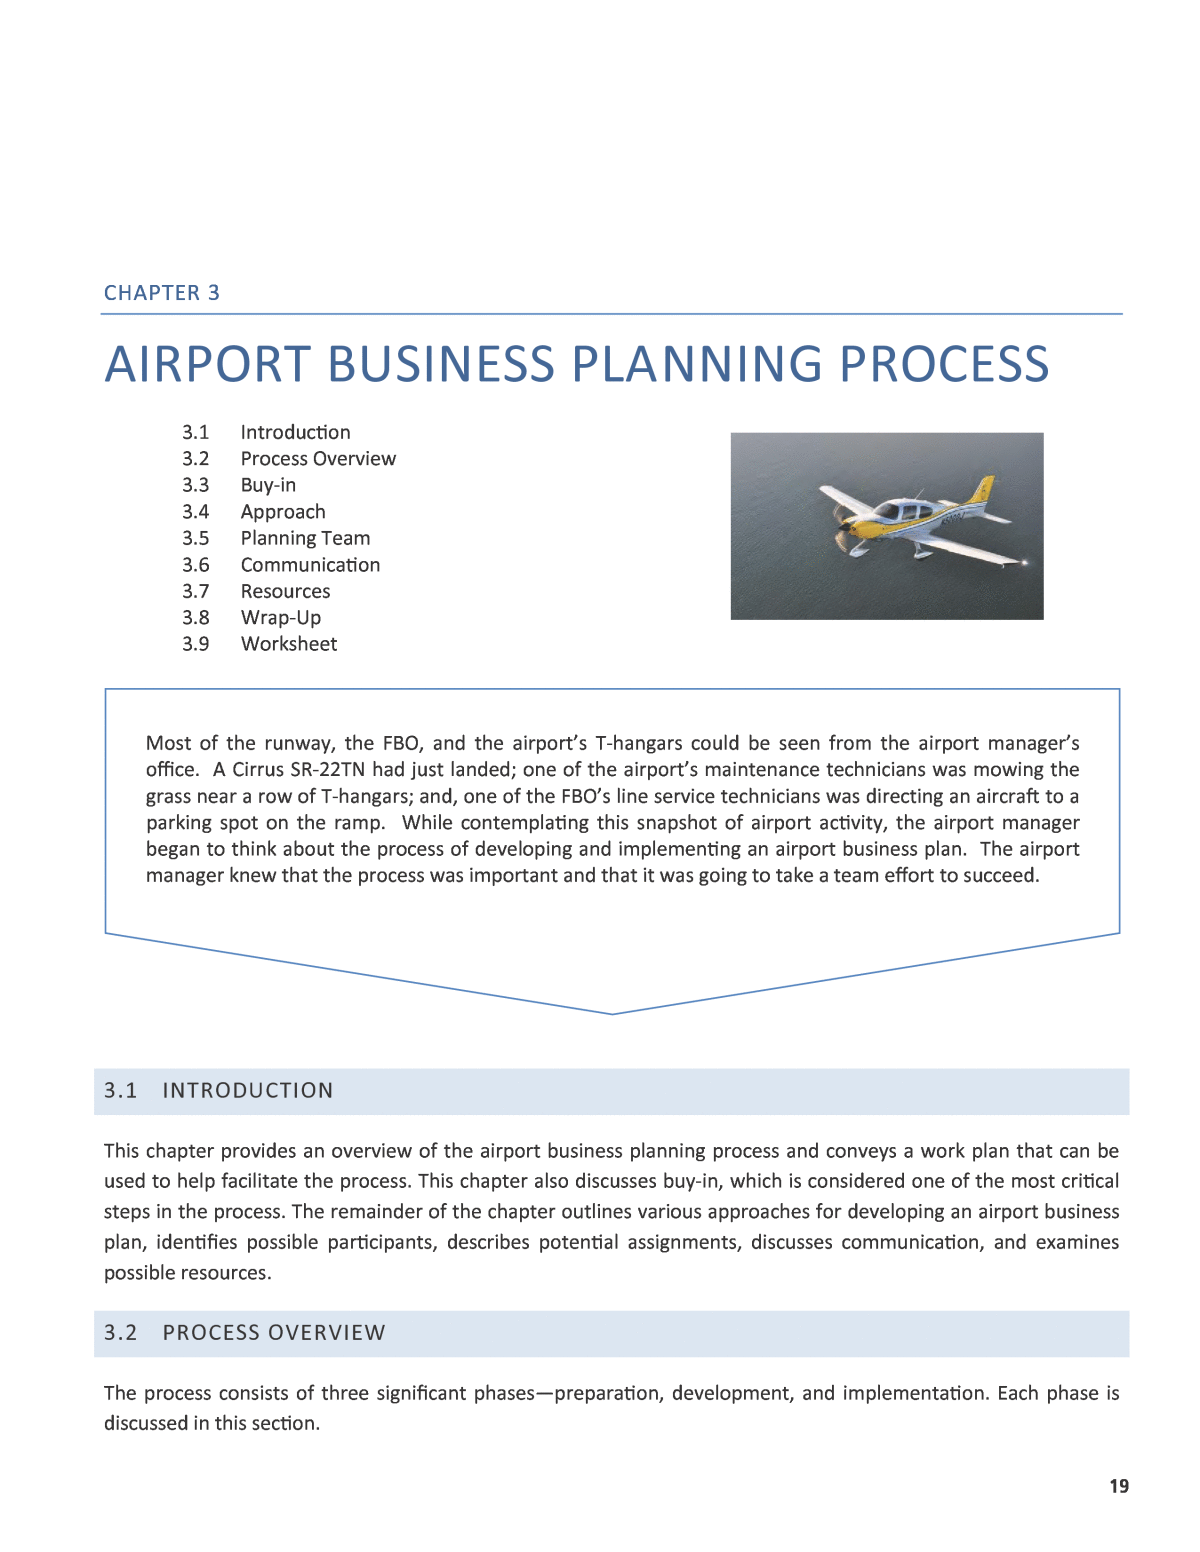 airport business plan